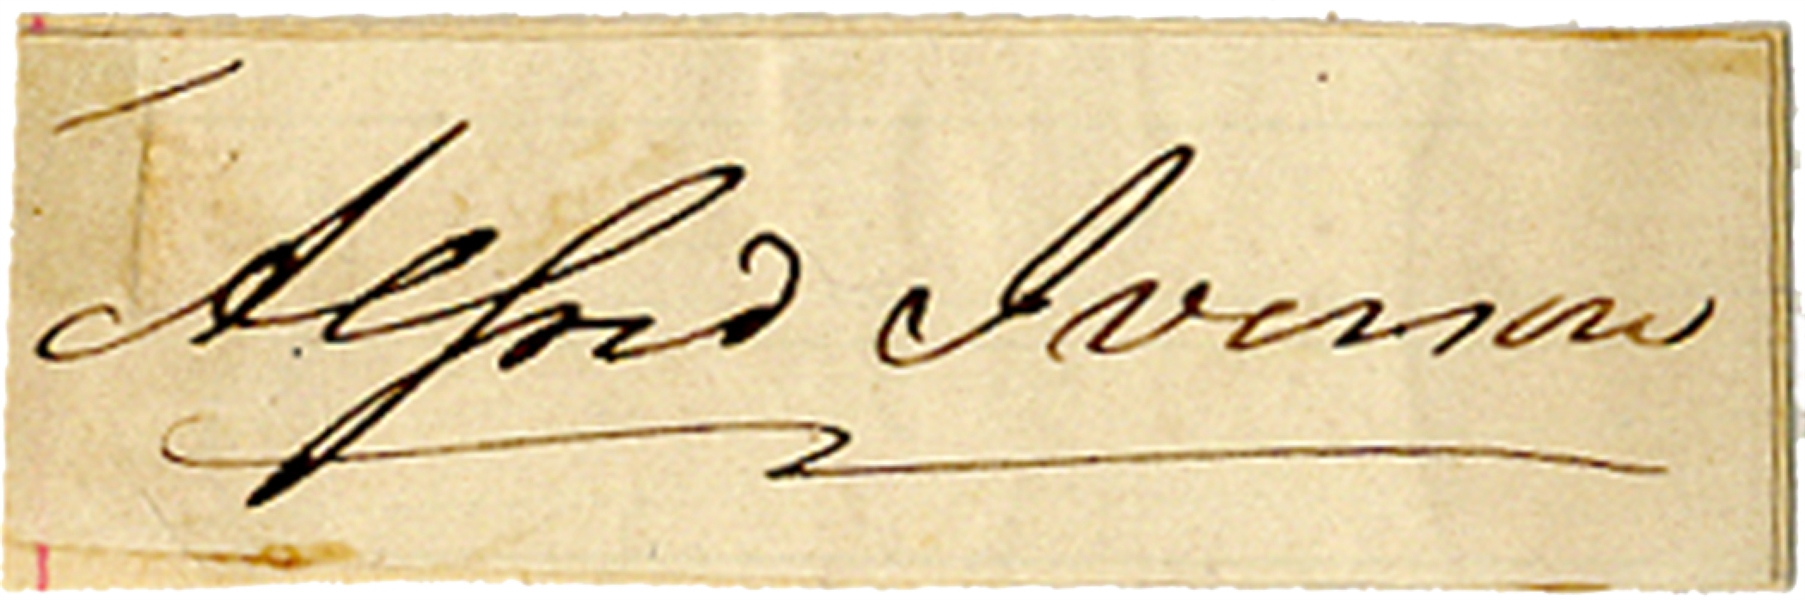 CSA General Iverson - Clipped Signature